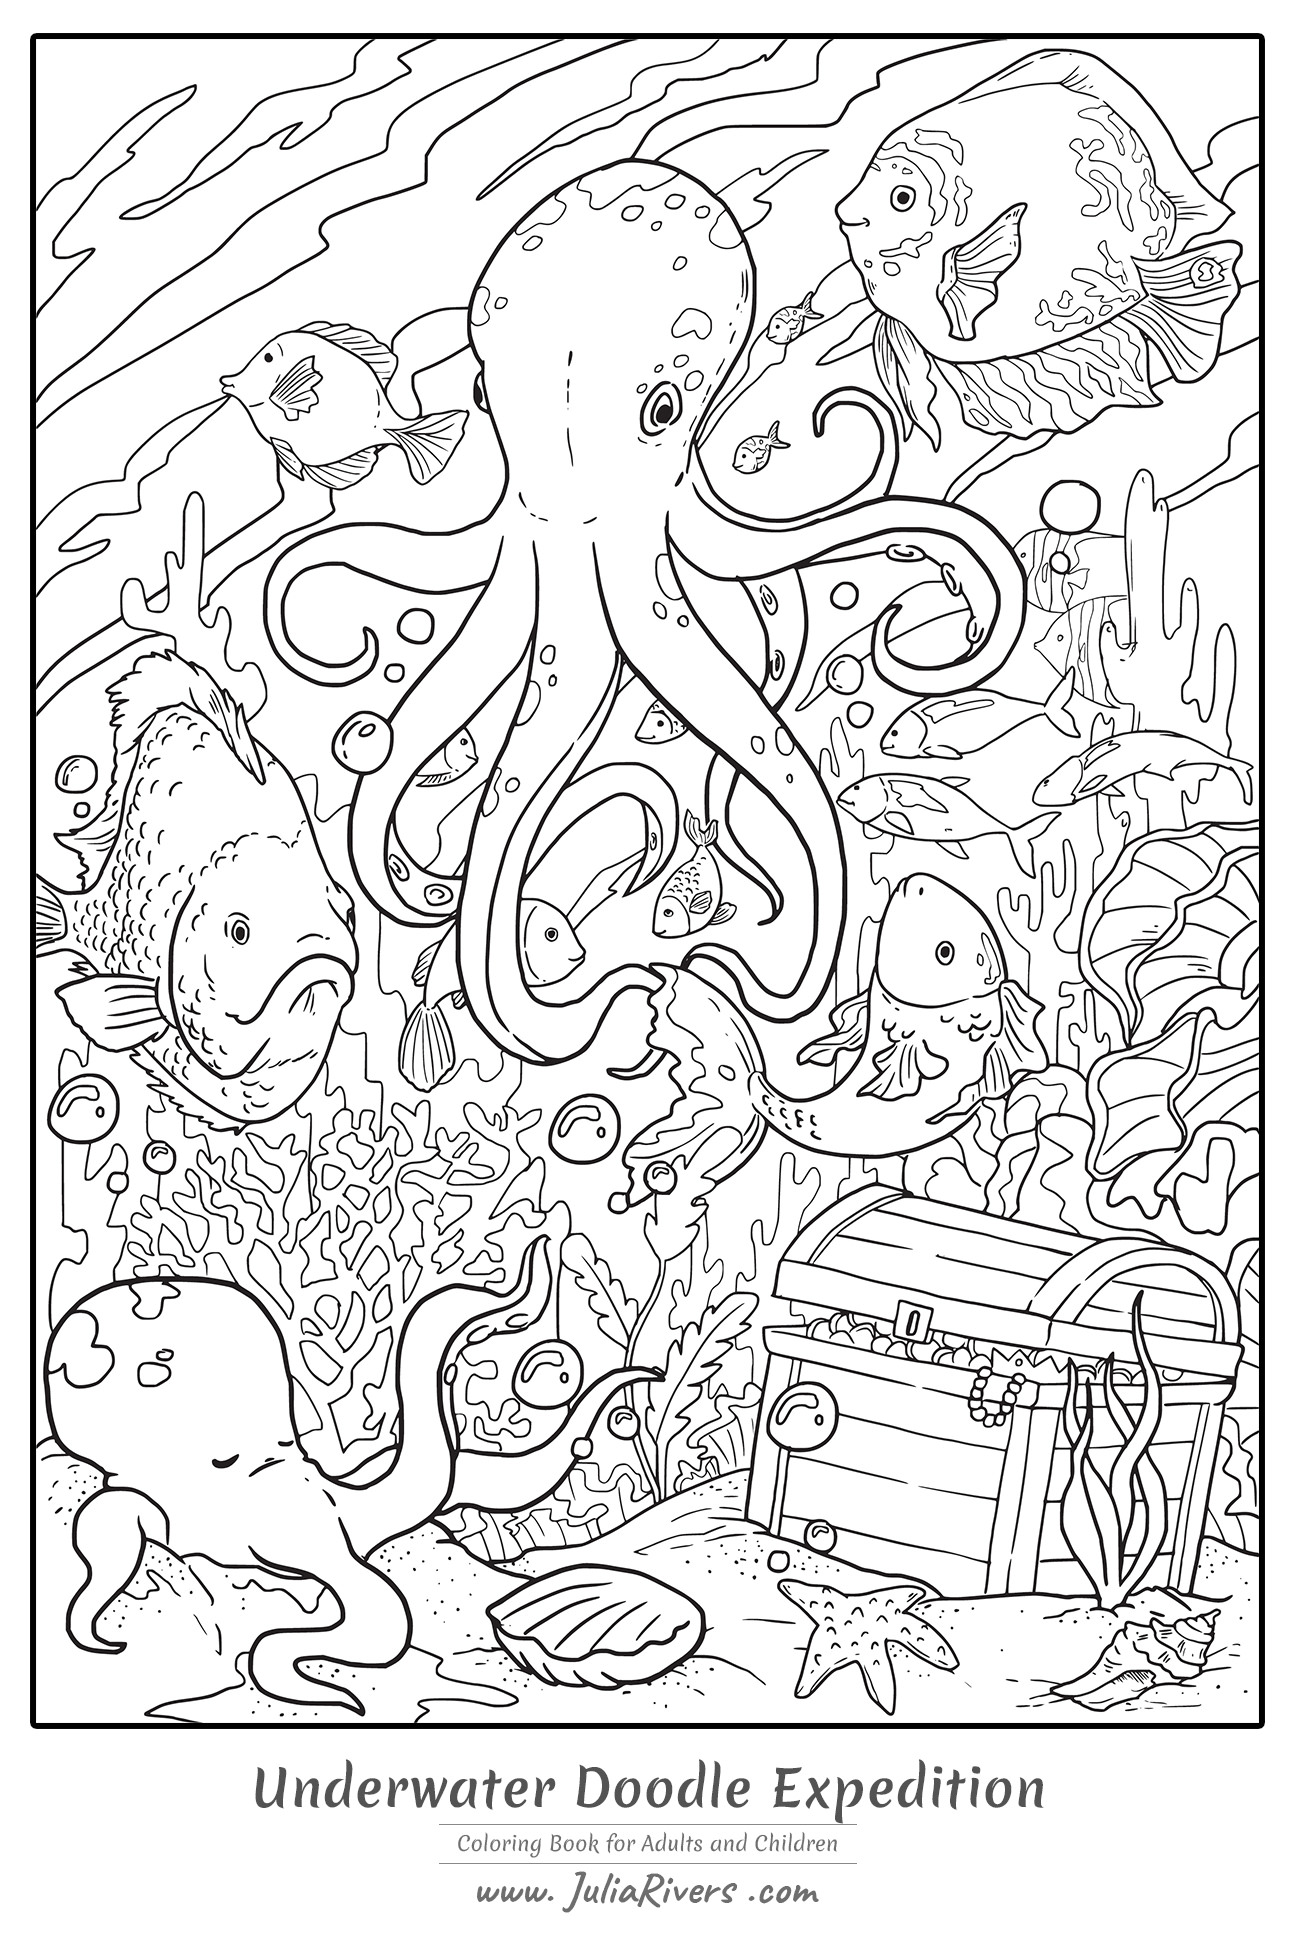 Underwater Doodle Expedition Water Worlds Adult Coloring Pages